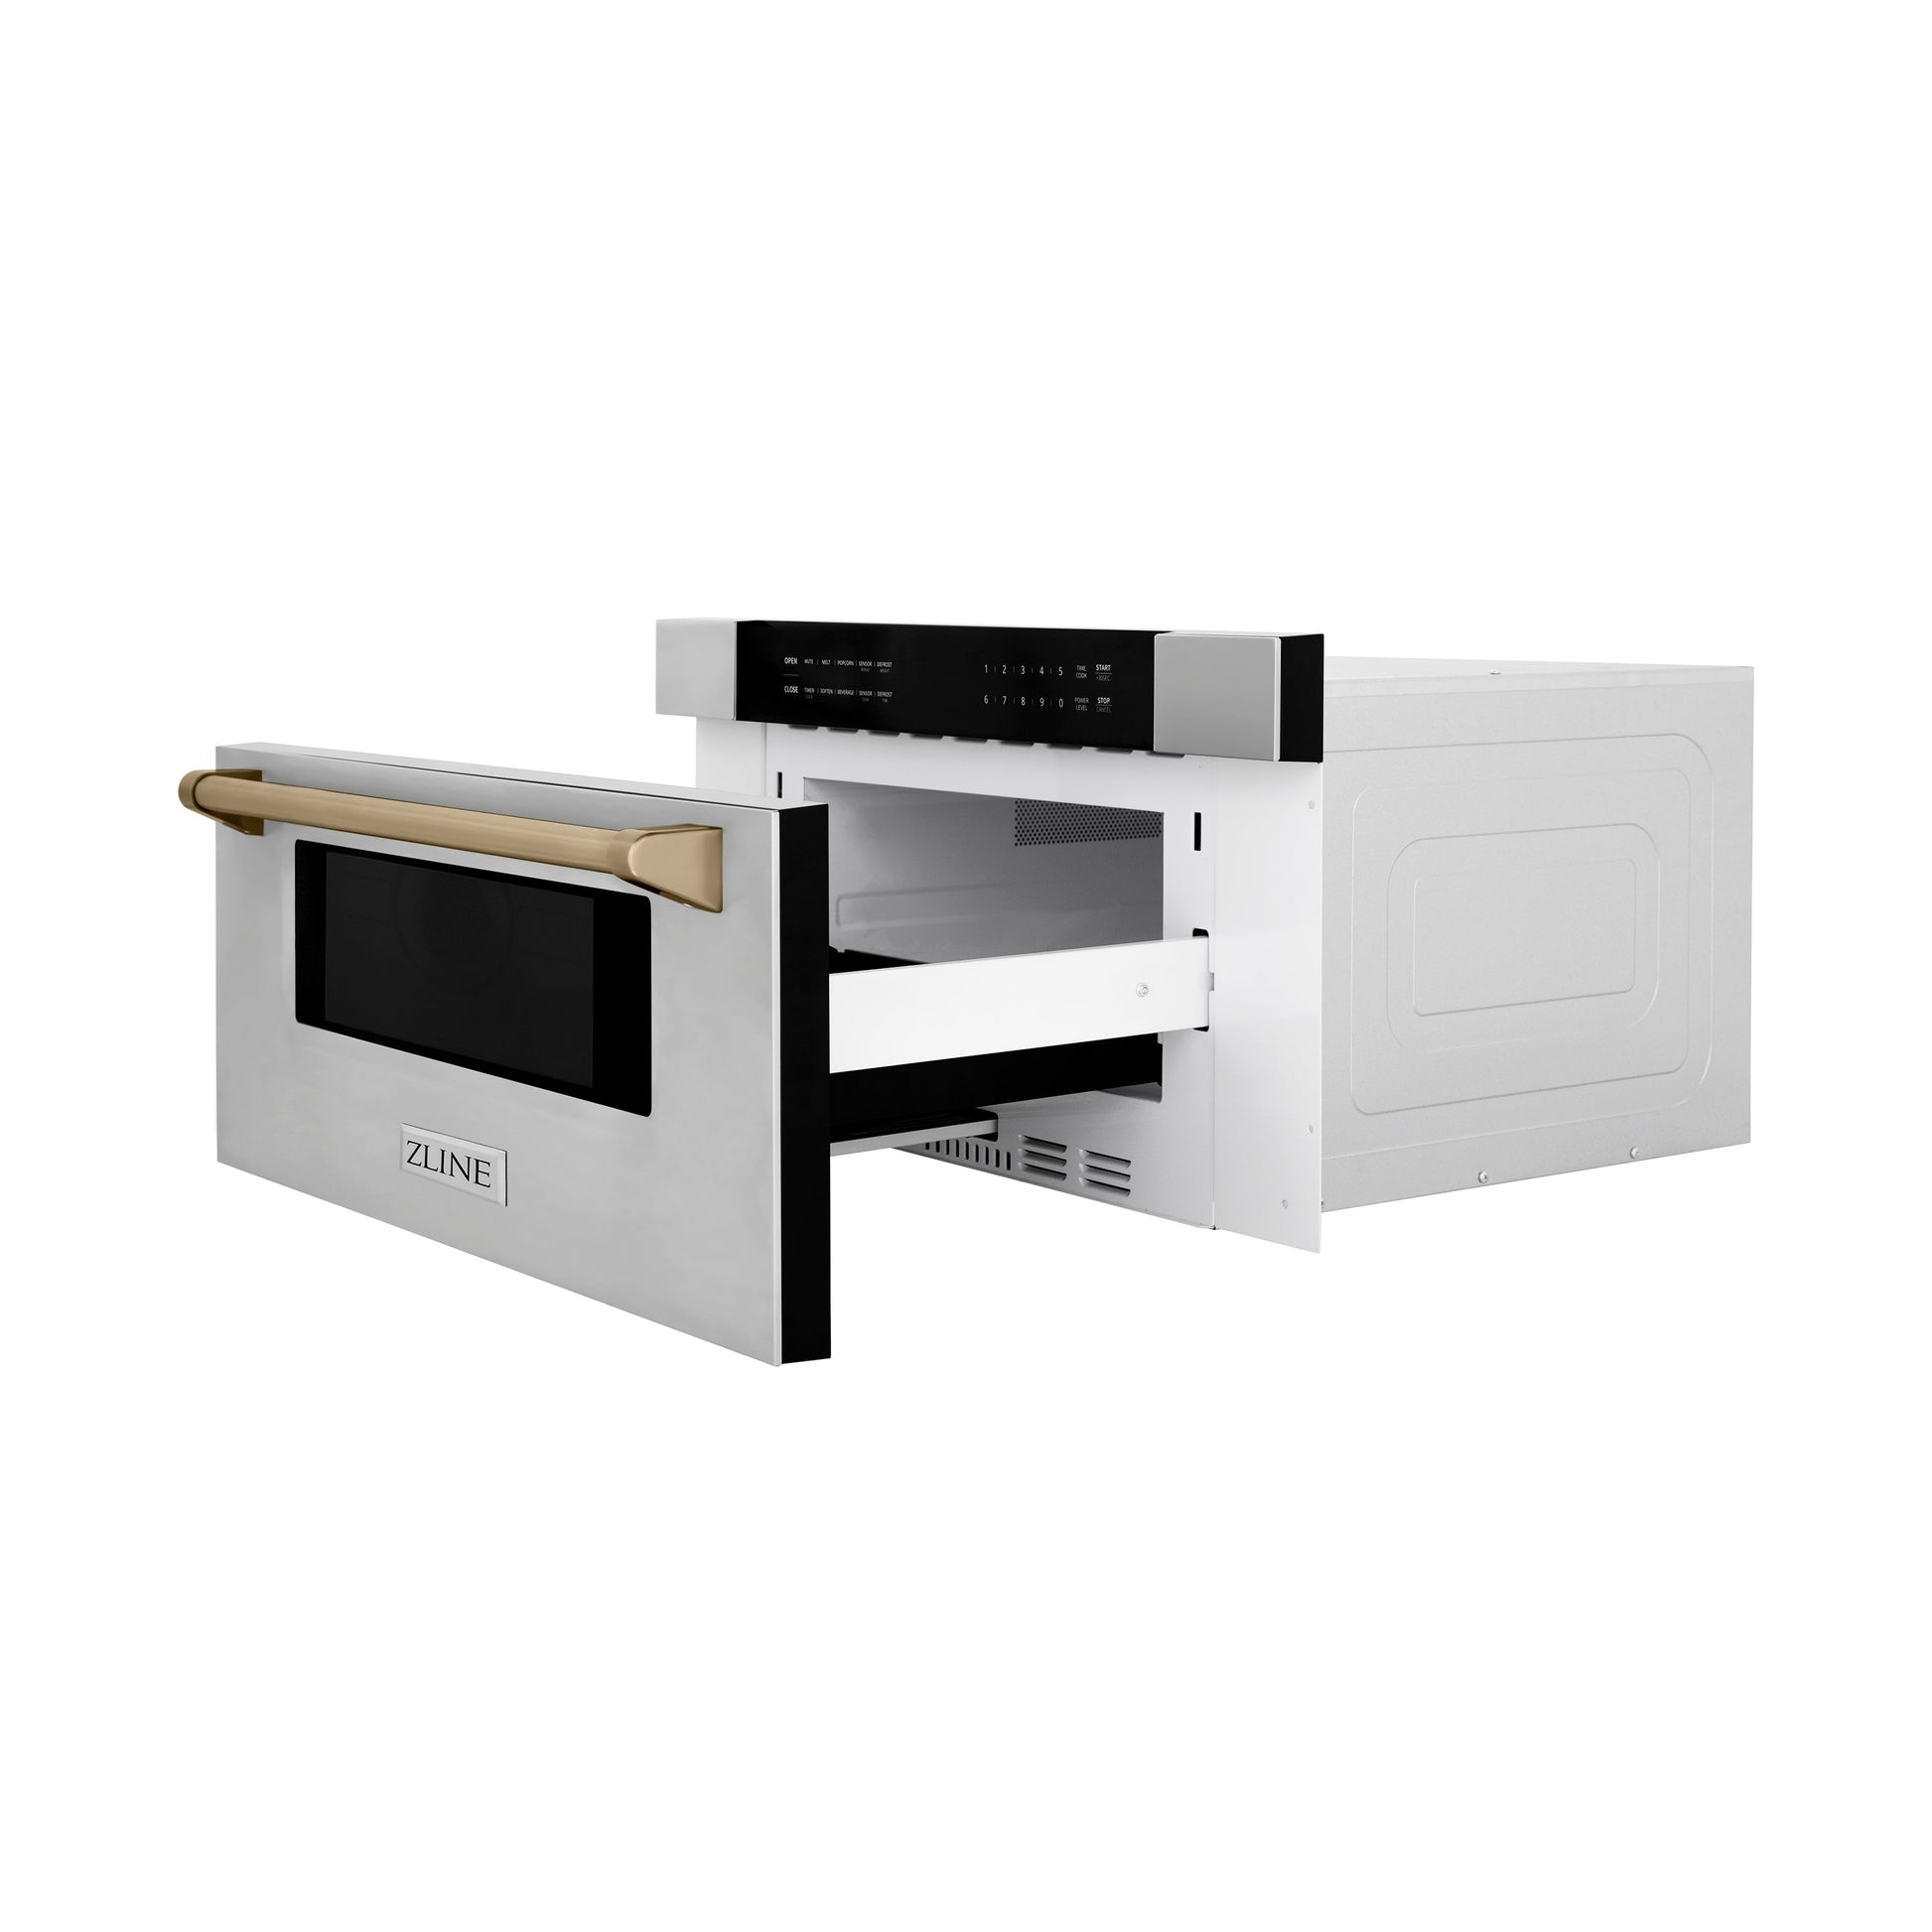 ZLINE Autograph Edition 30" Built-In Microwave Drawer - Stainless Steel with Accents